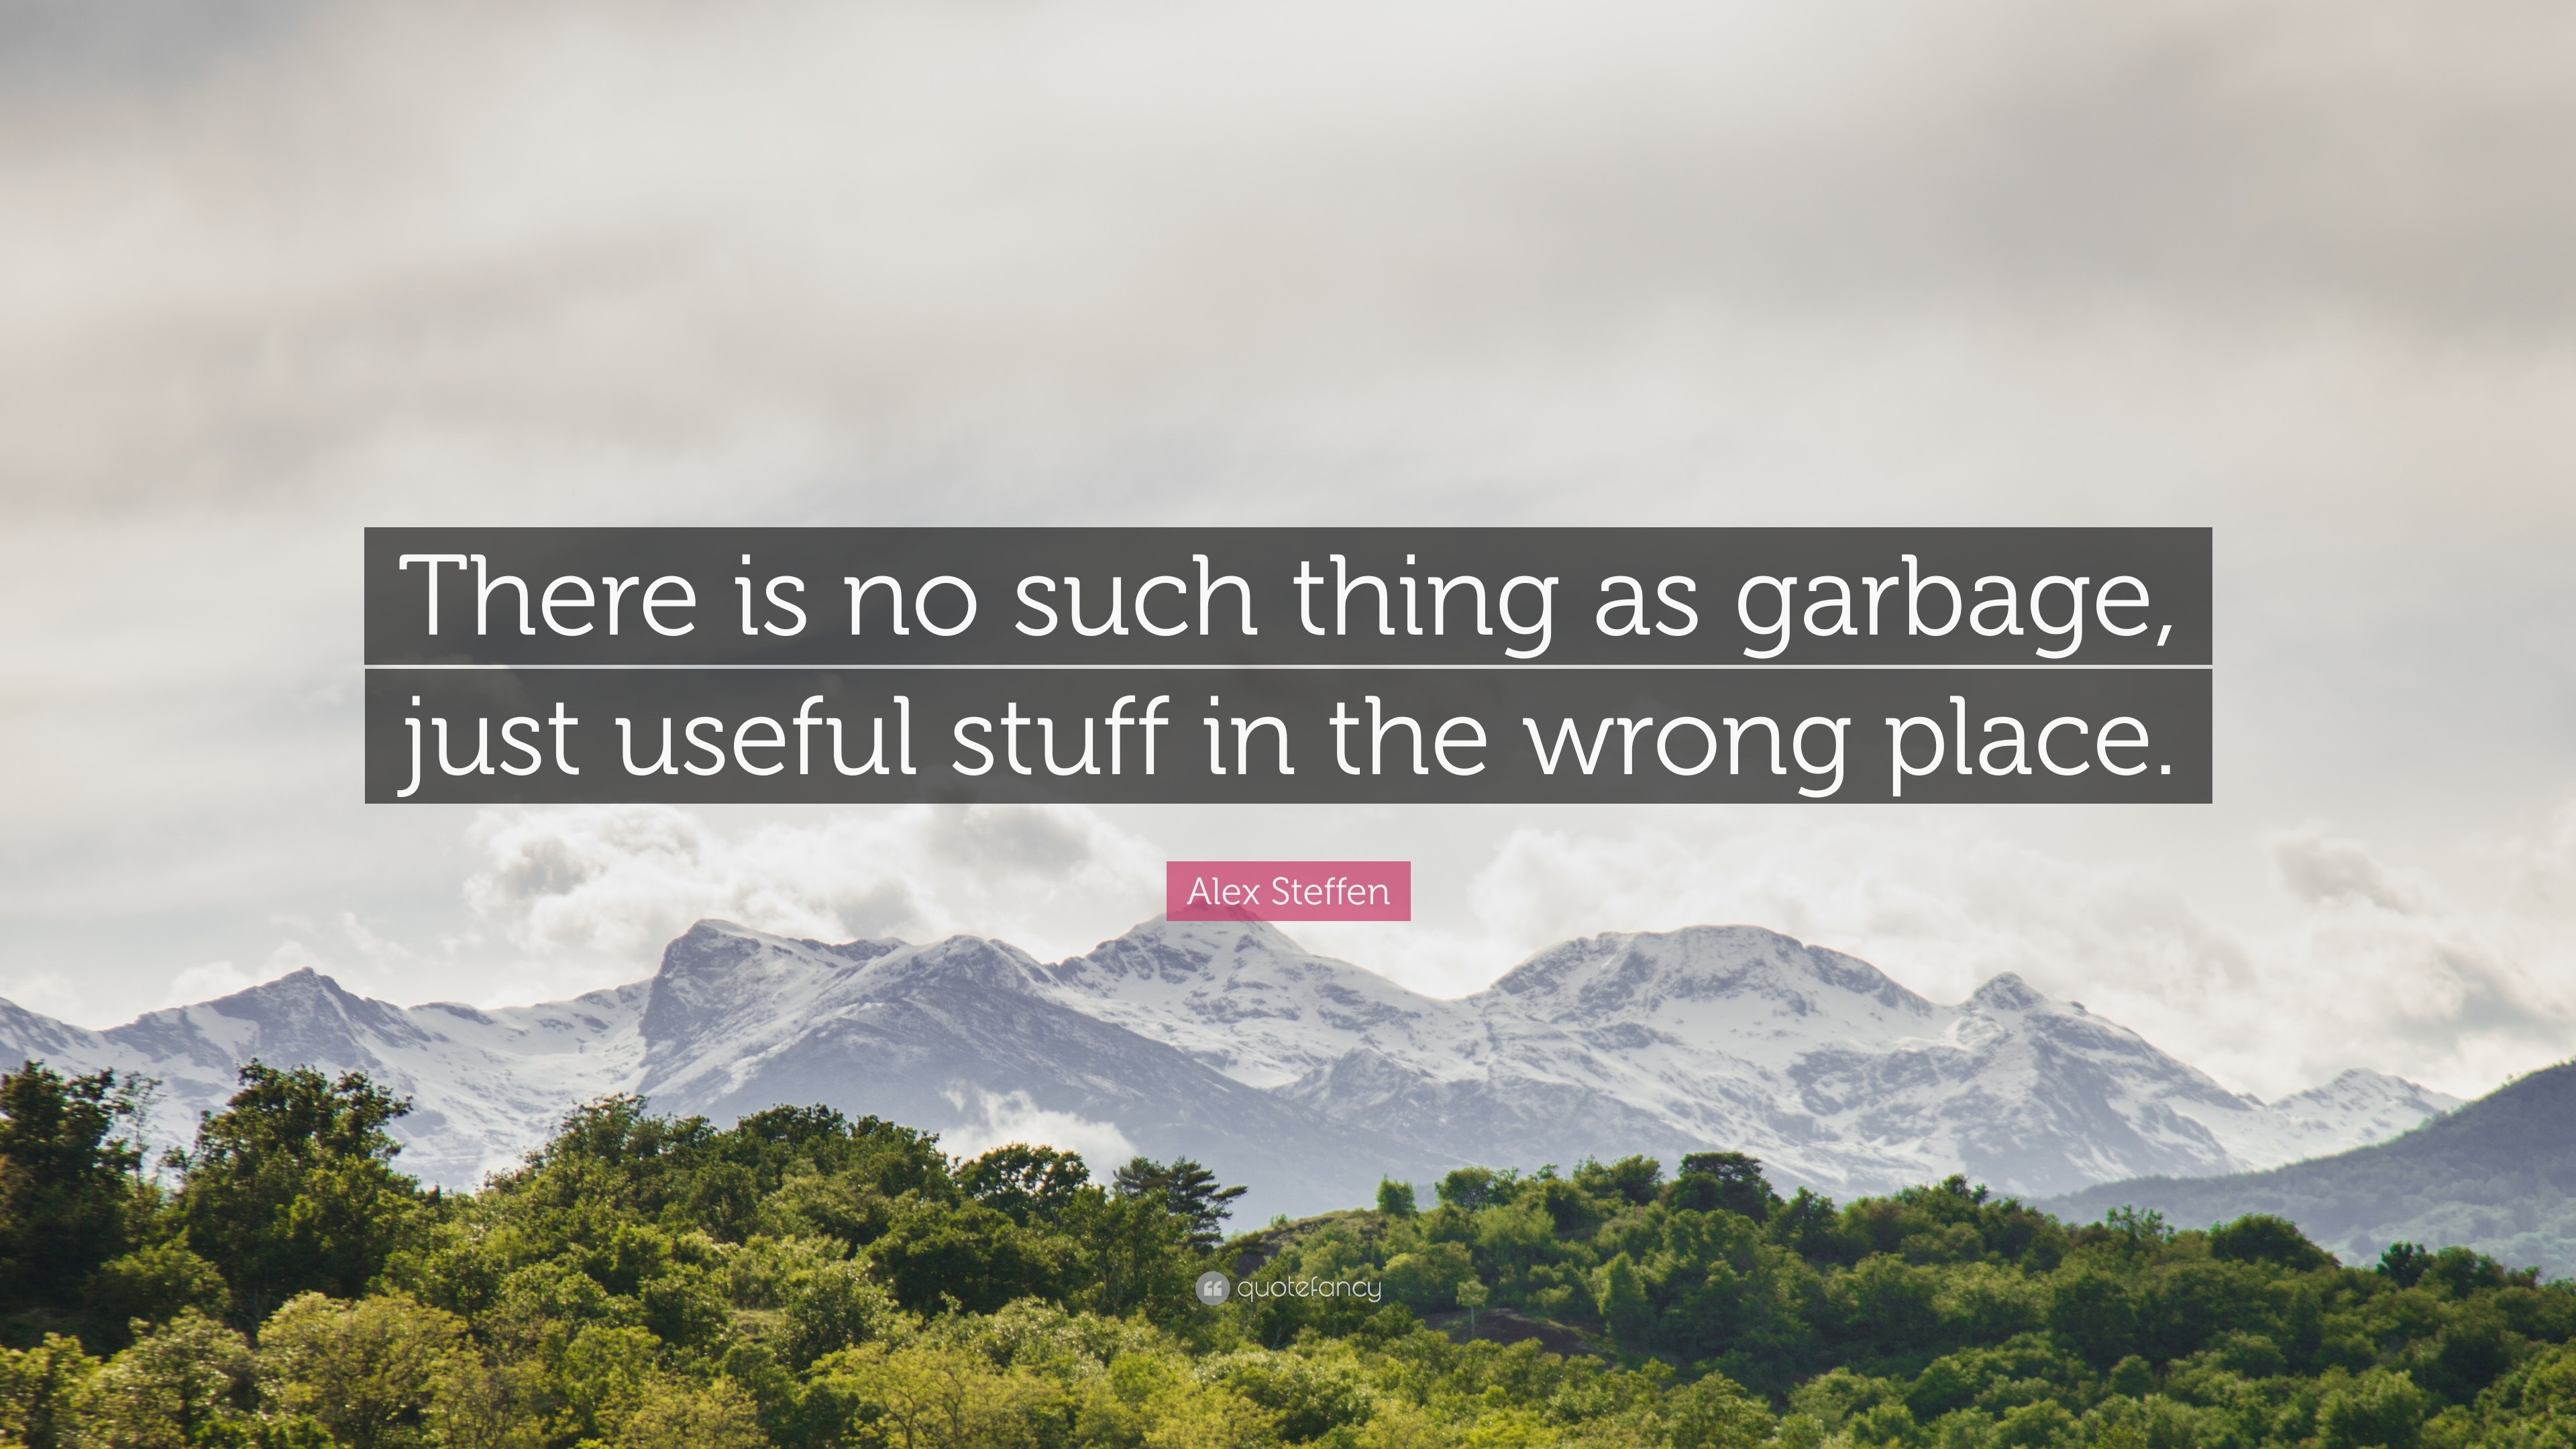 https://quotefancy.com/media/wallpaper/3840x2160/1105077-Alex-Steffen-Quote-There-is-no-such-thing-as-garbage-just-useful.jpg